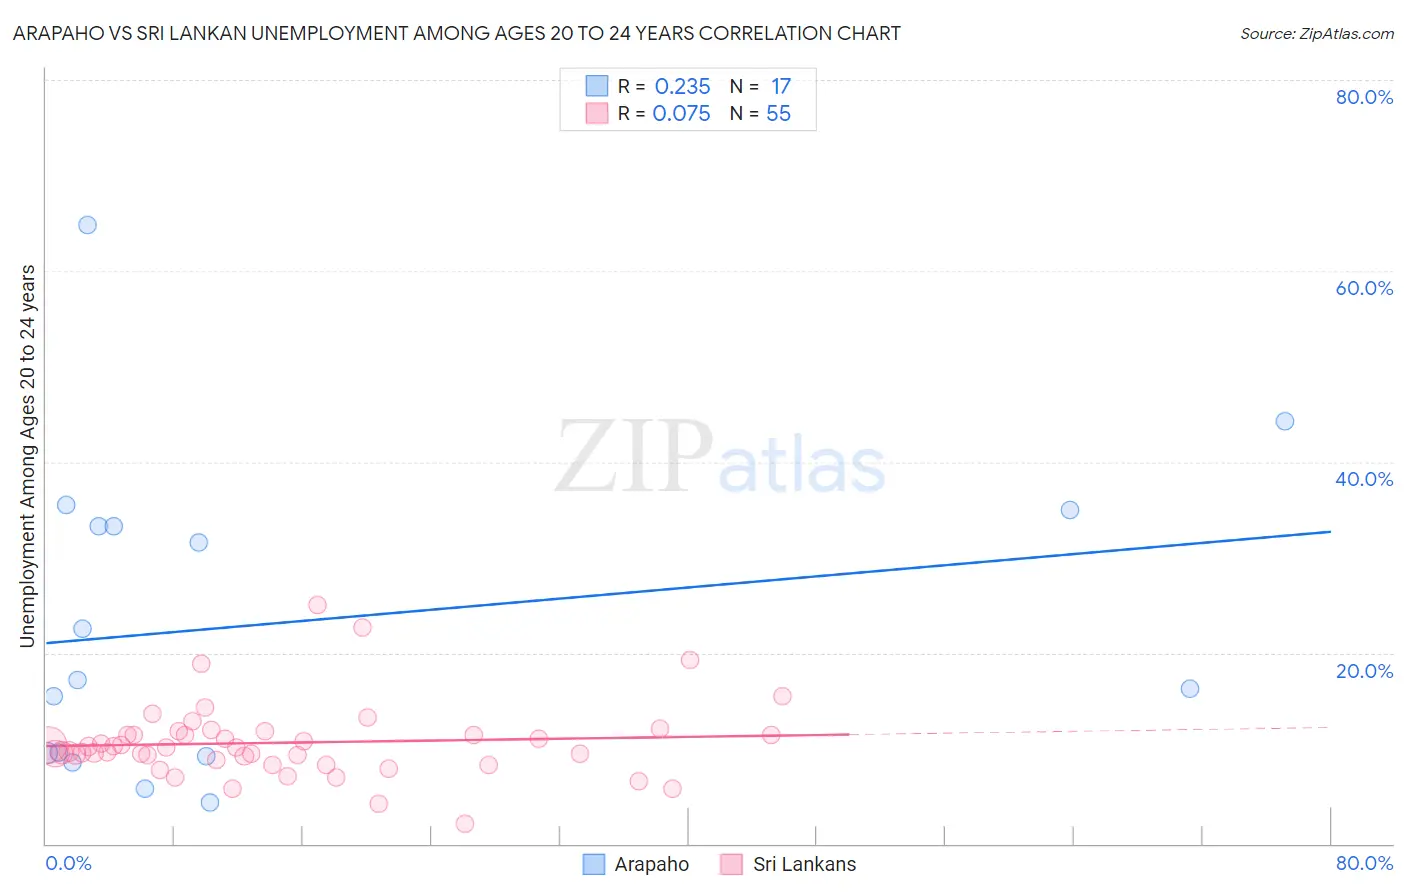 Arapaho vs Sri Lankan Unemployment Among Ages 20 to 24 years